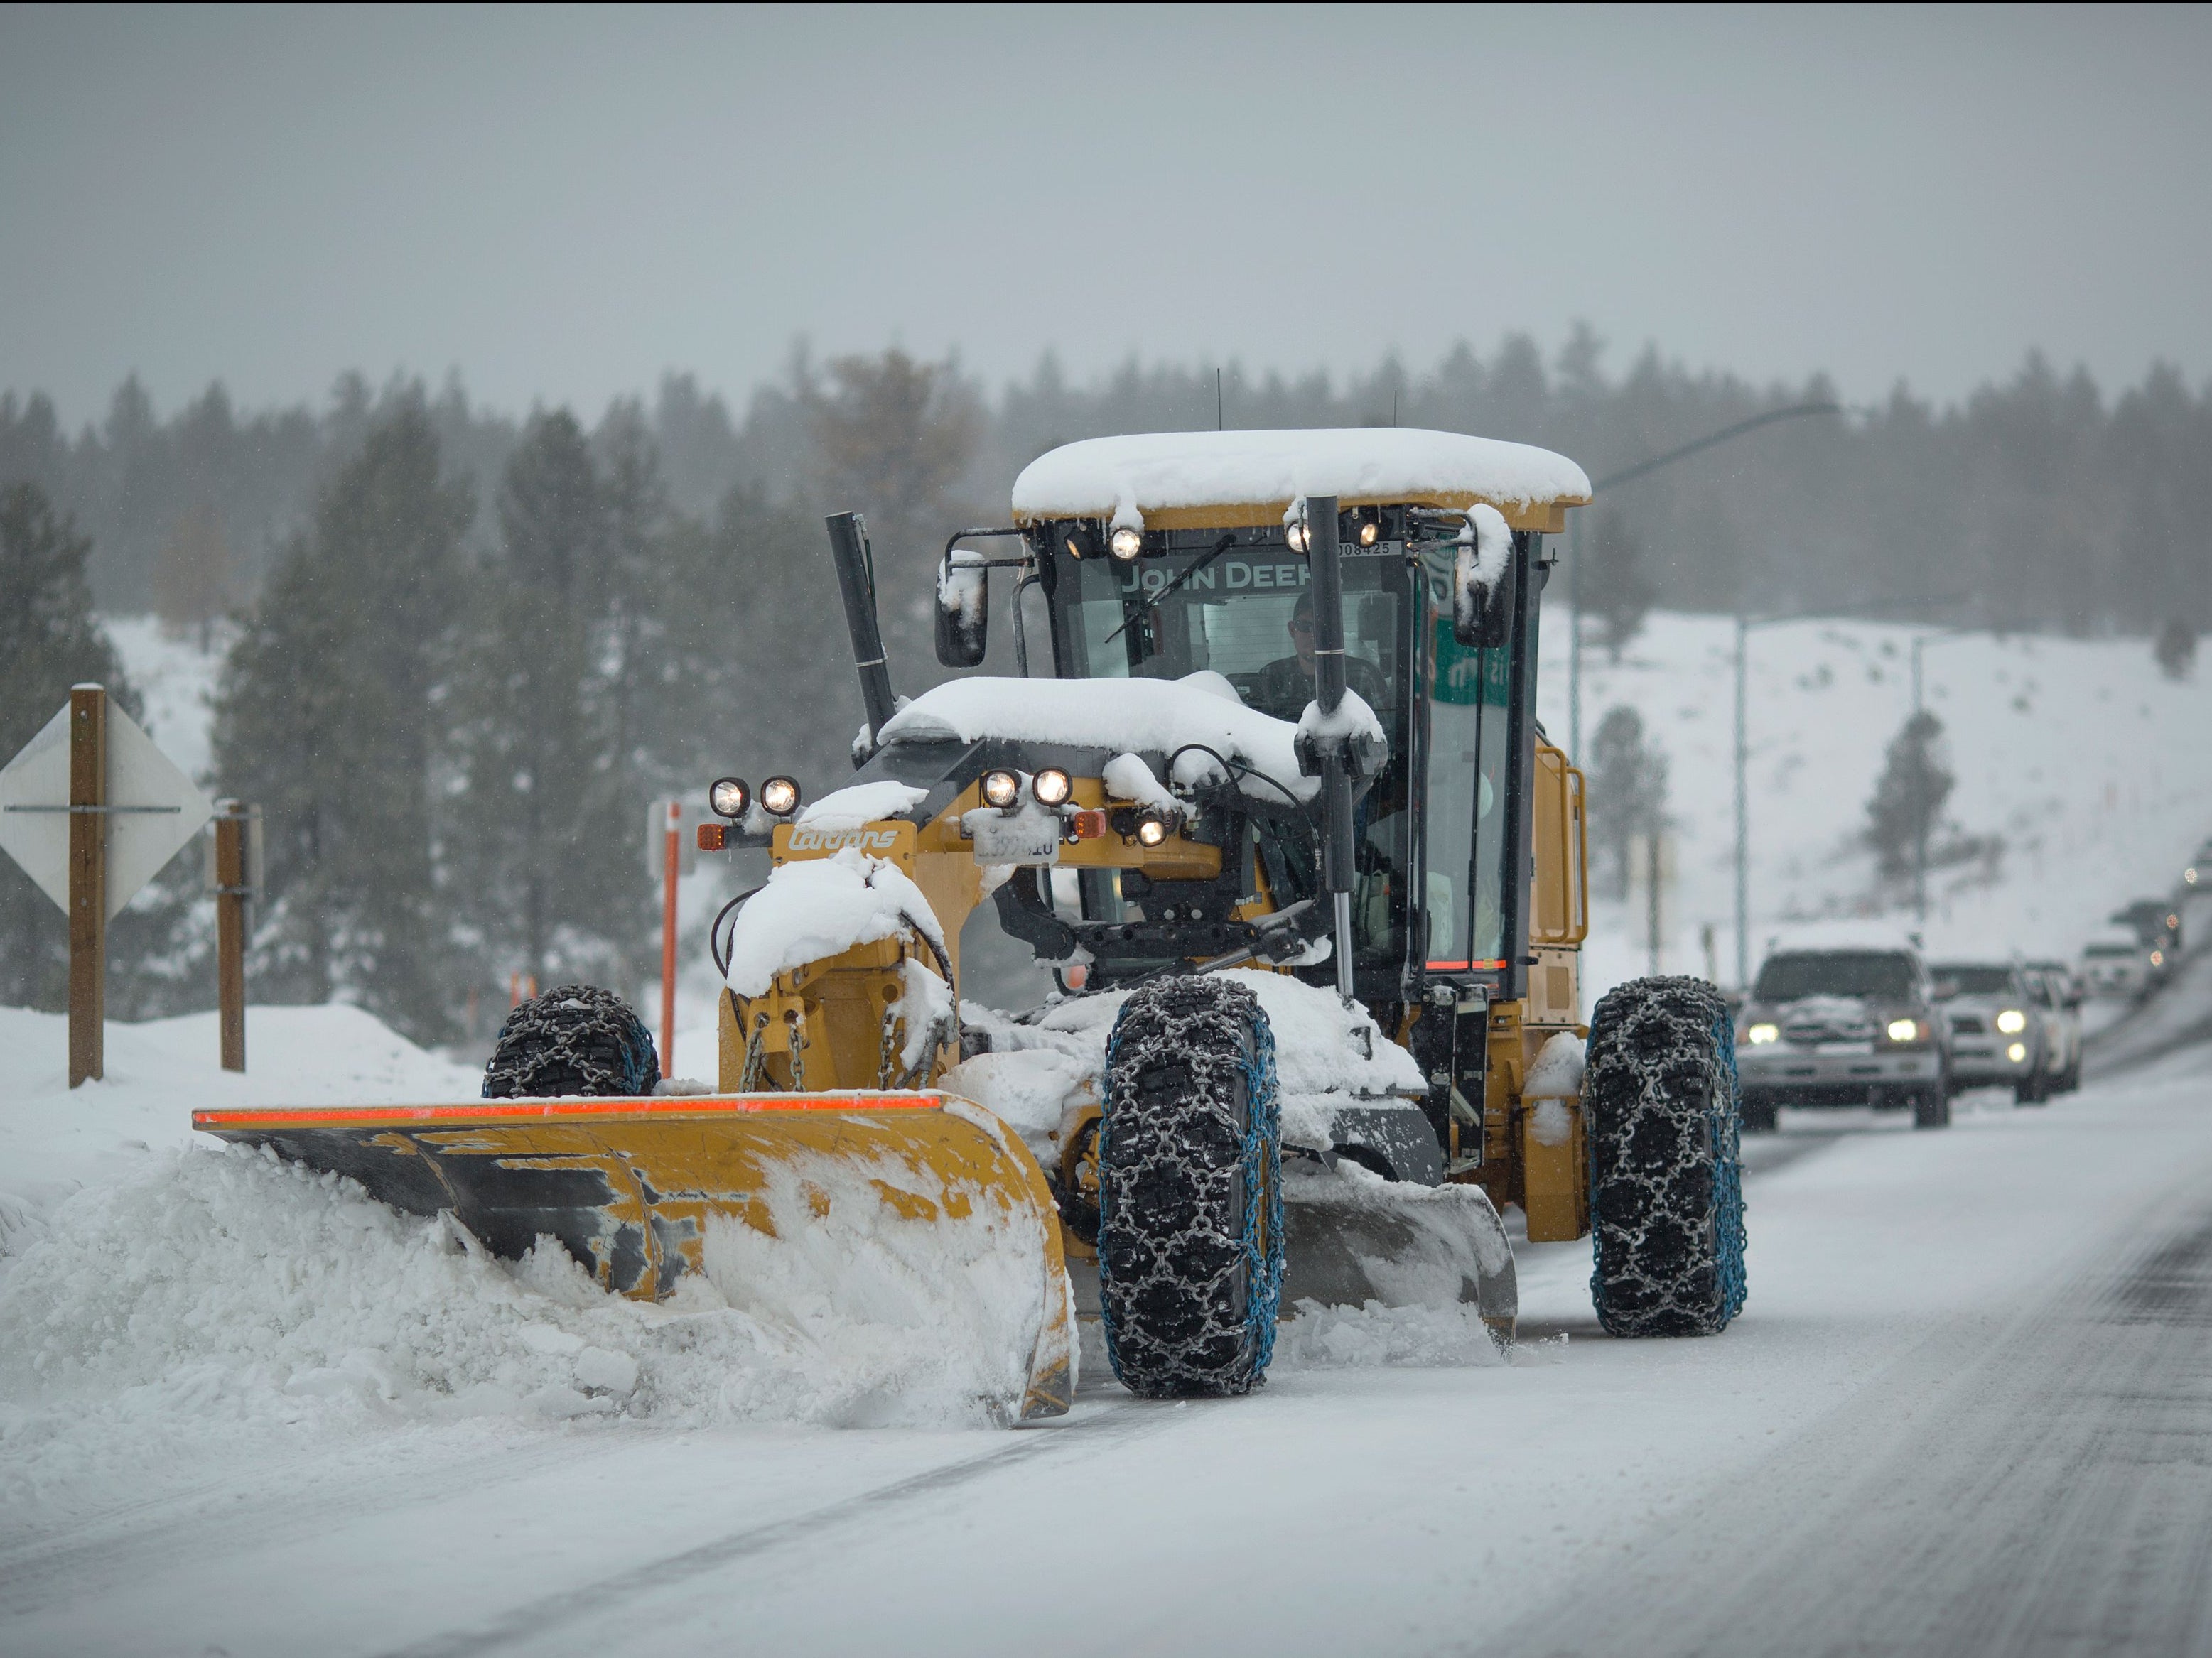 A line of cars follows a tractor plowing snow near Mammoth Lakes, California on 9 January 2017